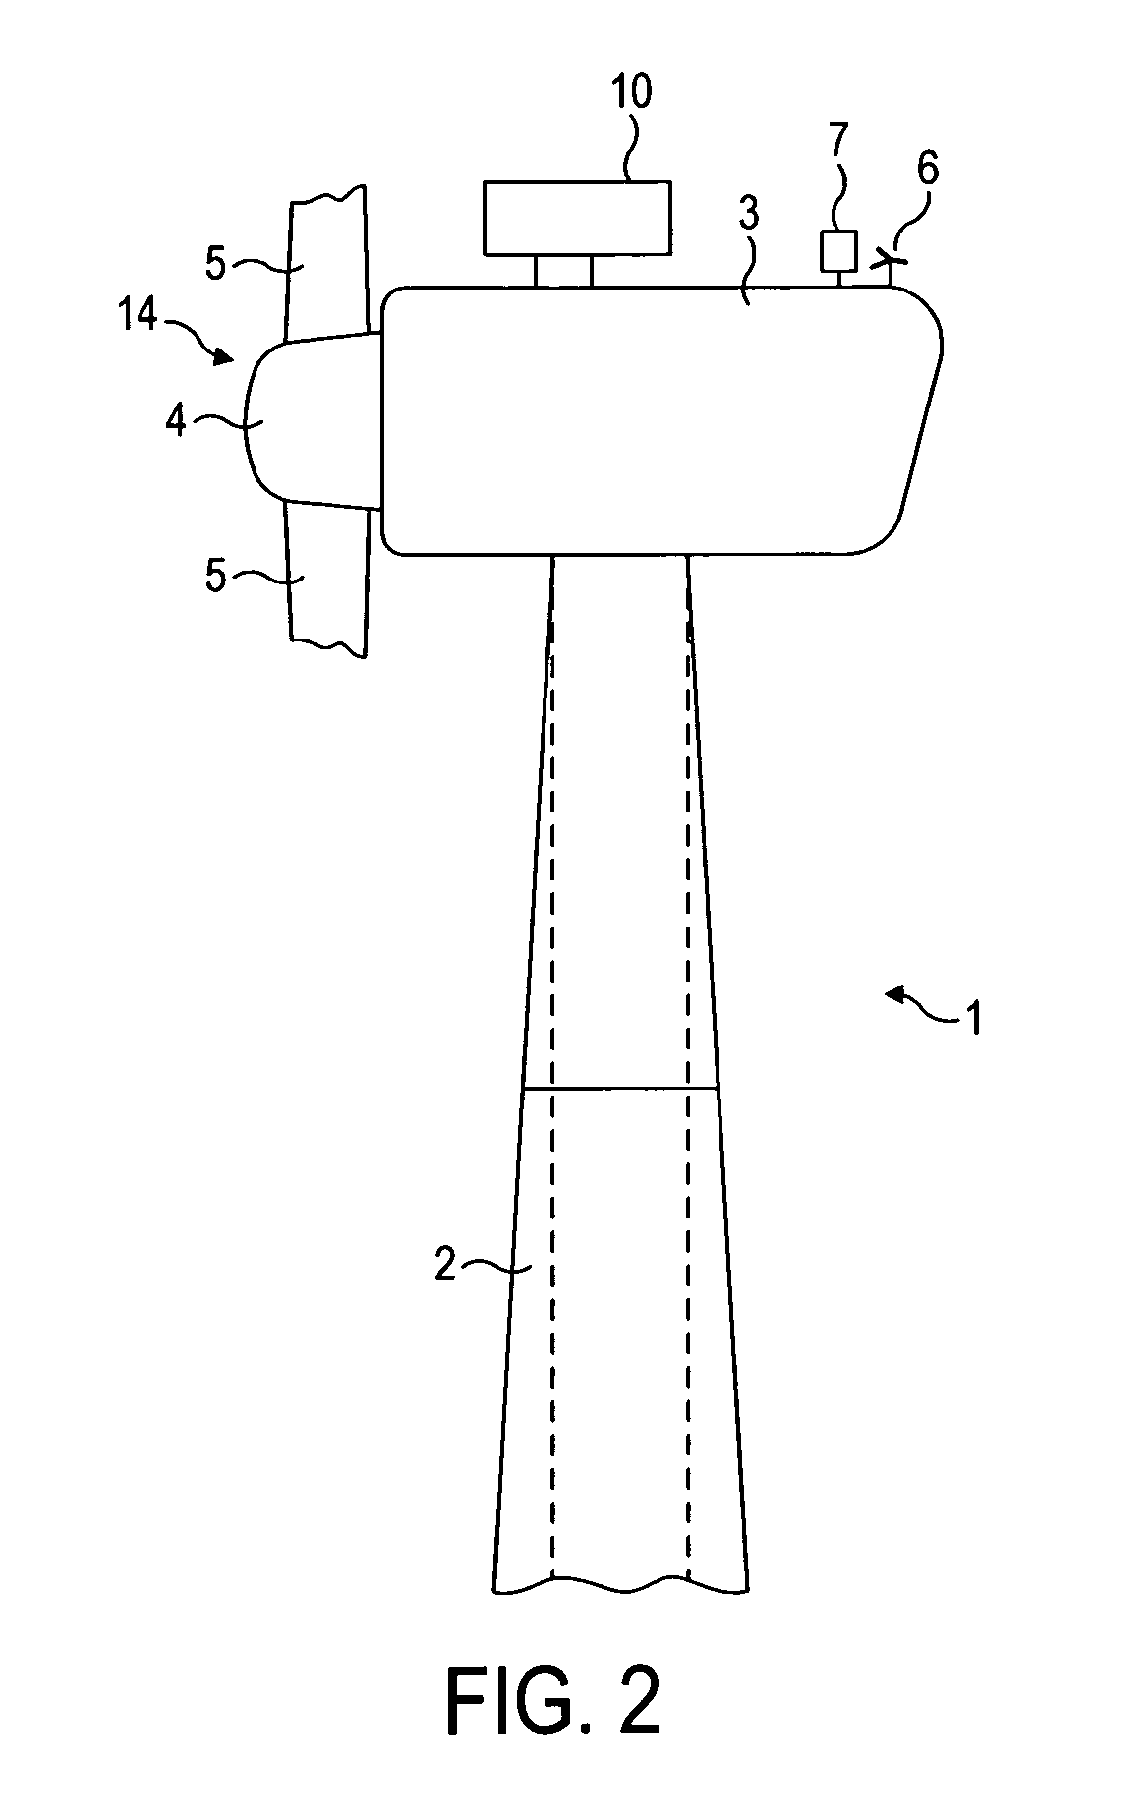 Method and apparatus for protecting wind turbines from fatigue damage